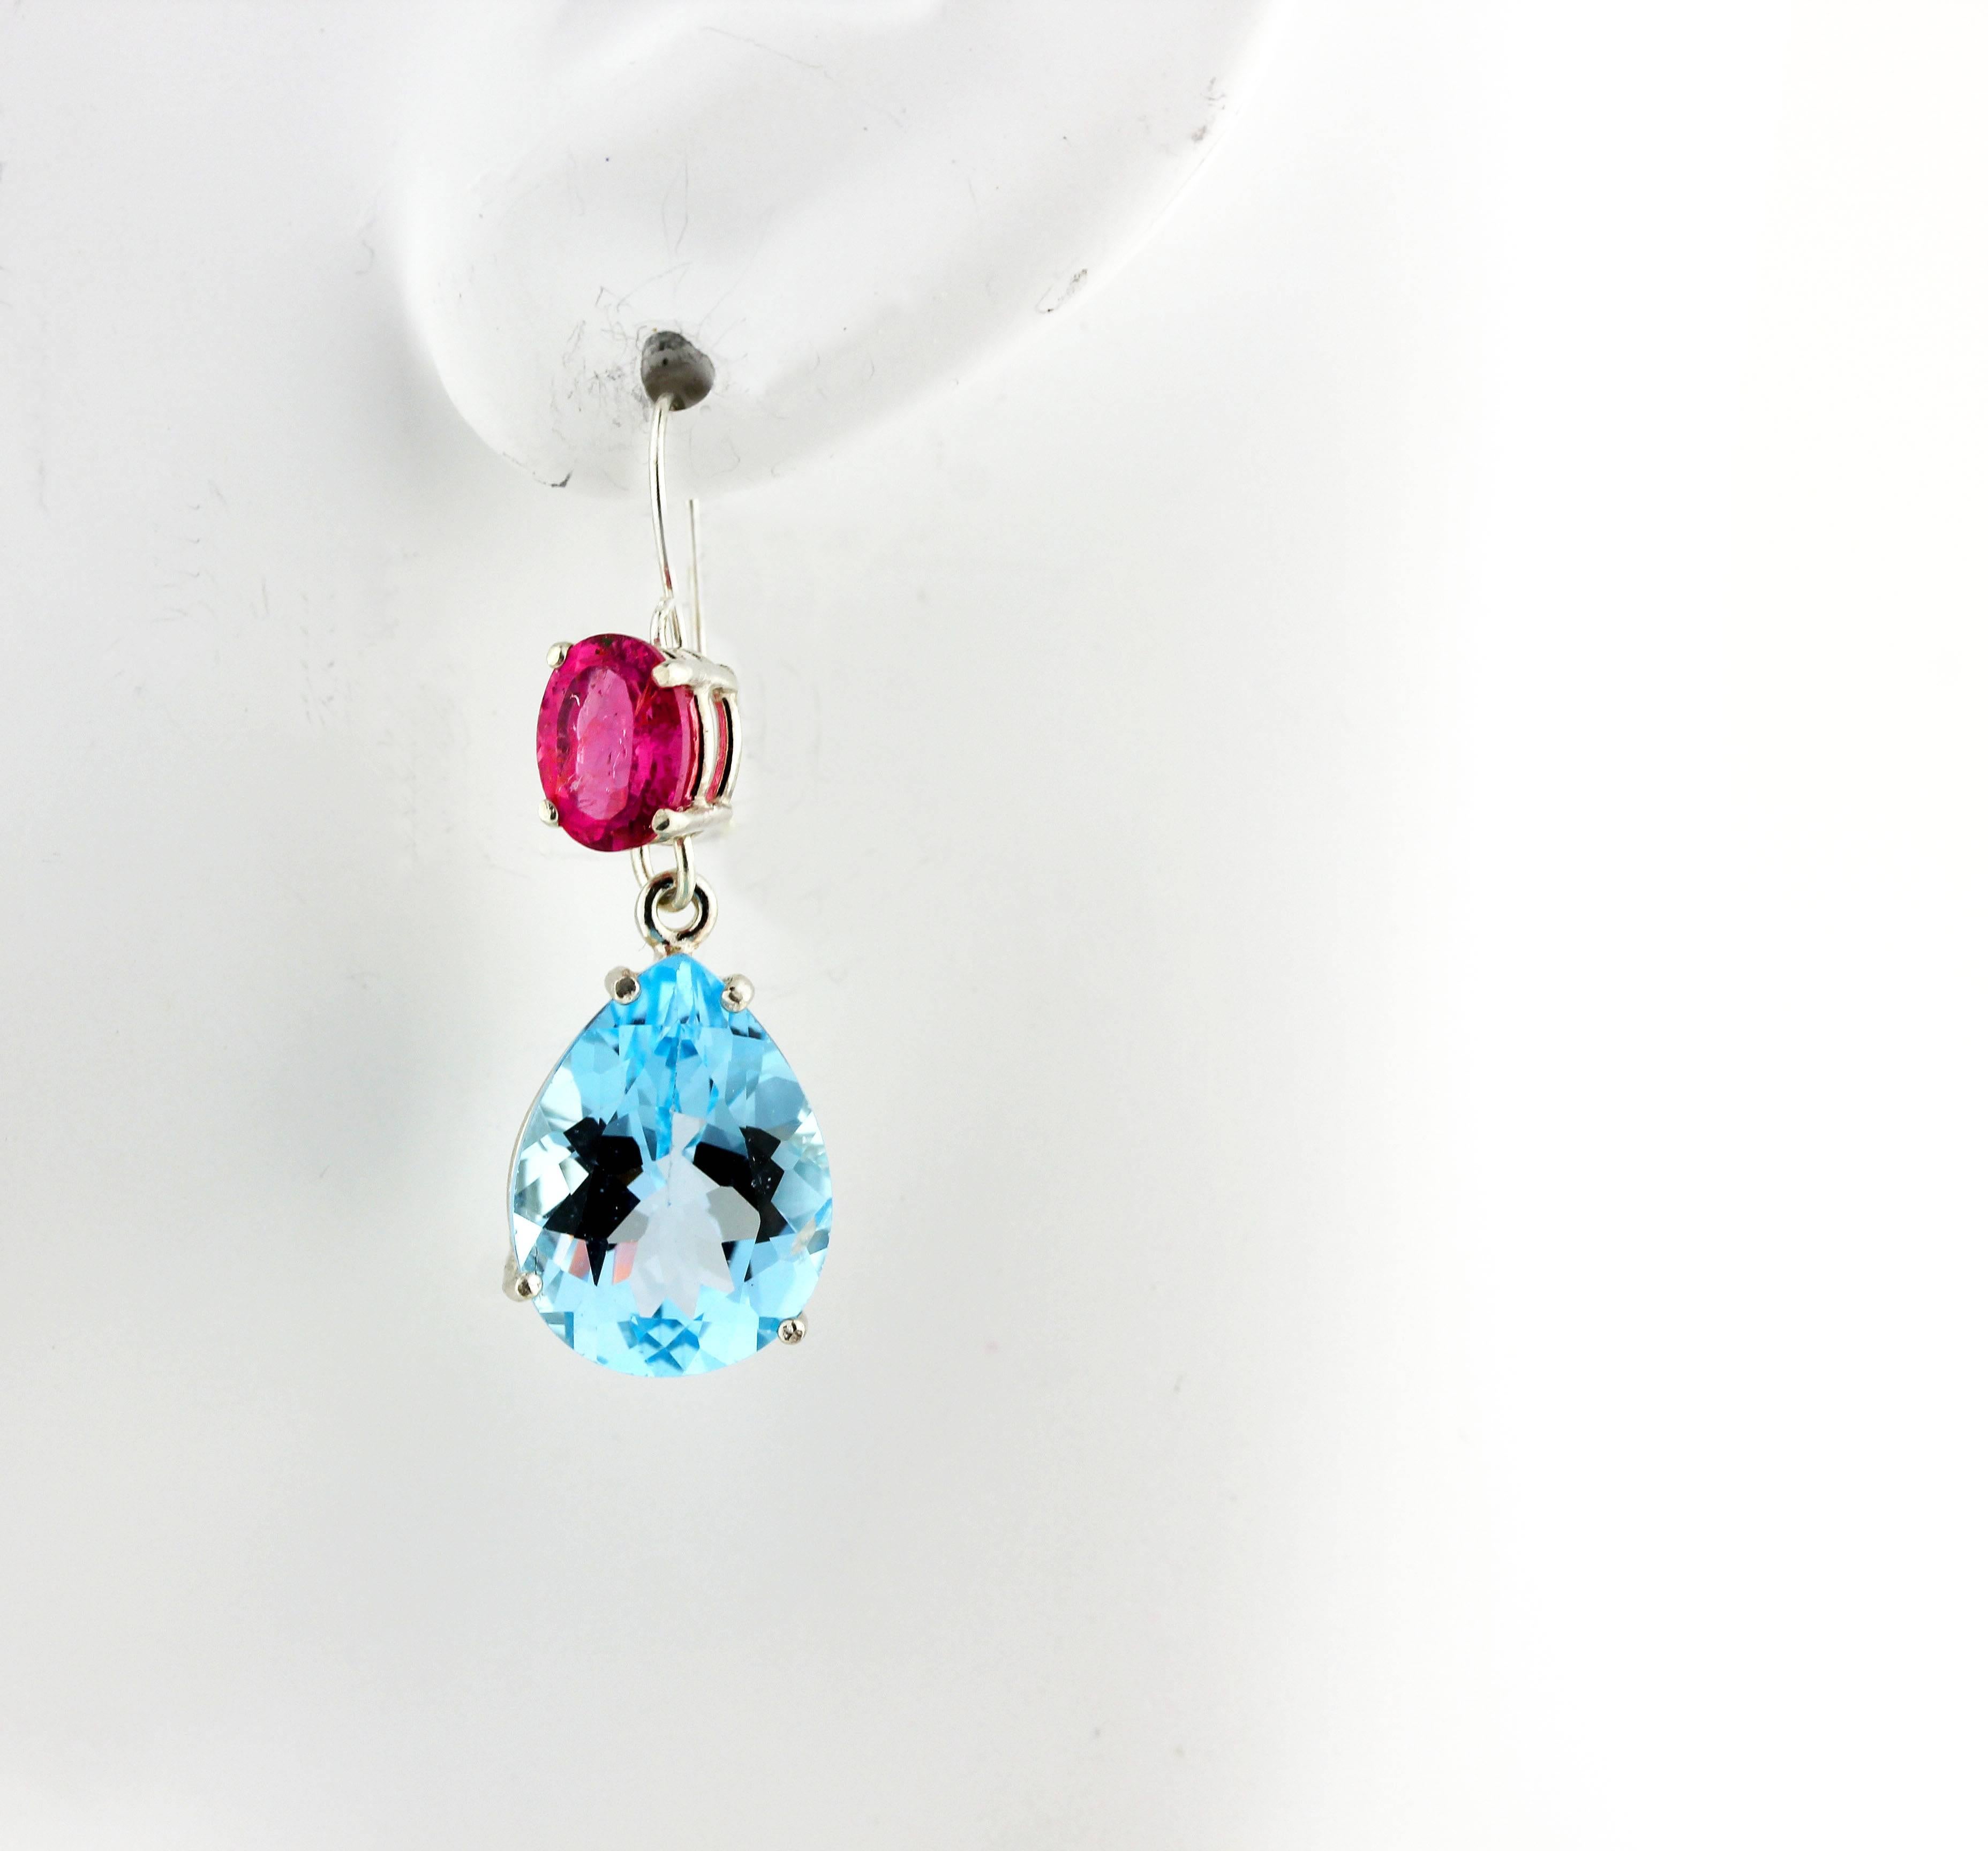 18.65 carats of brilliant swinging blue Topaz dangle wonderfully from these sparkling glittering 2.55 carats of pink Tourmalines set in sterling silver hook earrings.  The blue Topaz measure 15.8 mm x 11.92 mm and the pink Tourmaline measure 7.8 mm